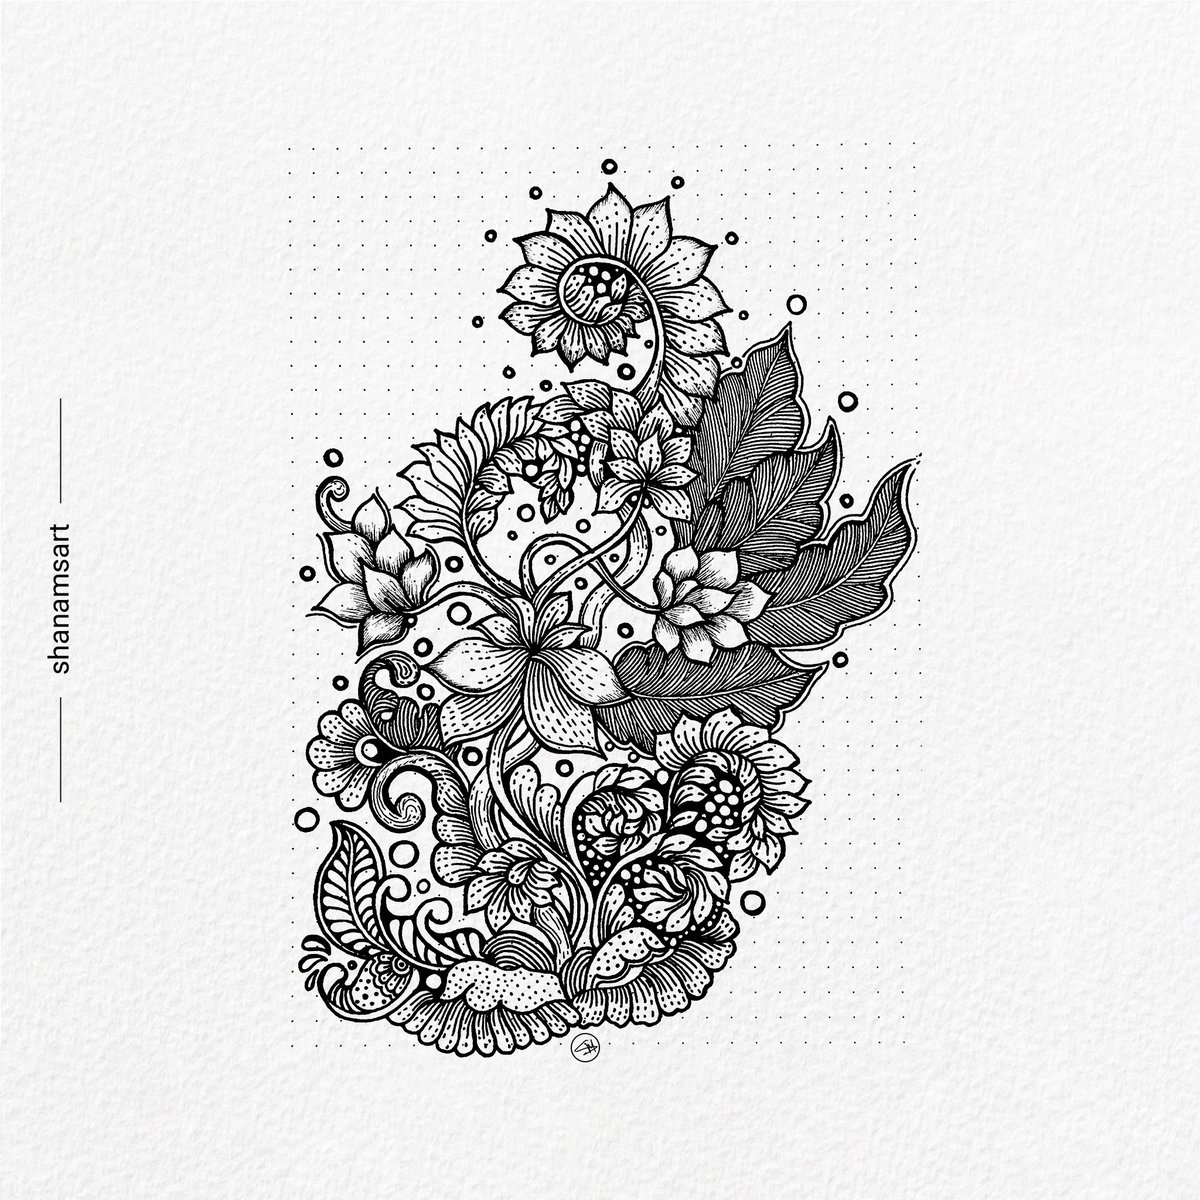 Harmony and Flow: The Art of ZenTangles - Finding peace in every stroke and letting my imagination flow step by step 🌿🧿🌿🌸 ©Shanamsart #Flowers #InkDrawing #RelaxingArt #AbstractArt #Nature #ArtistsOnX #Blackandwhite #Freehanddrawing #InspireMSArtists #Shanamsart